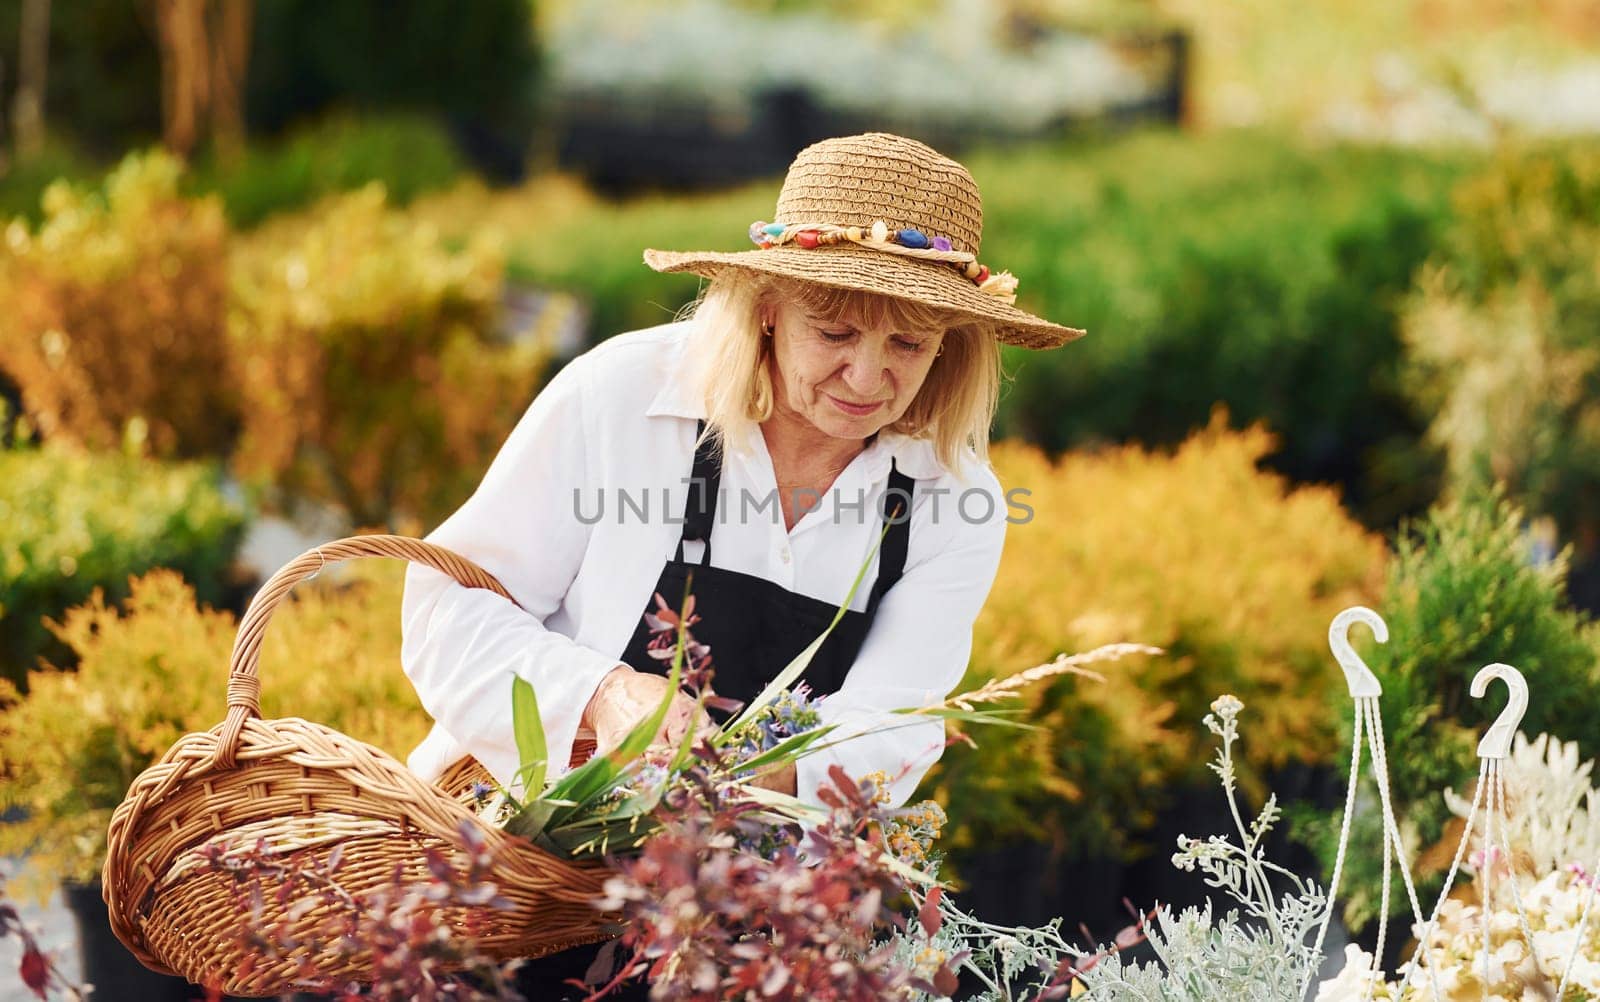 With basket in hands. Senior woman is in the garden at daytime. Conception of plants and seasons by Standret